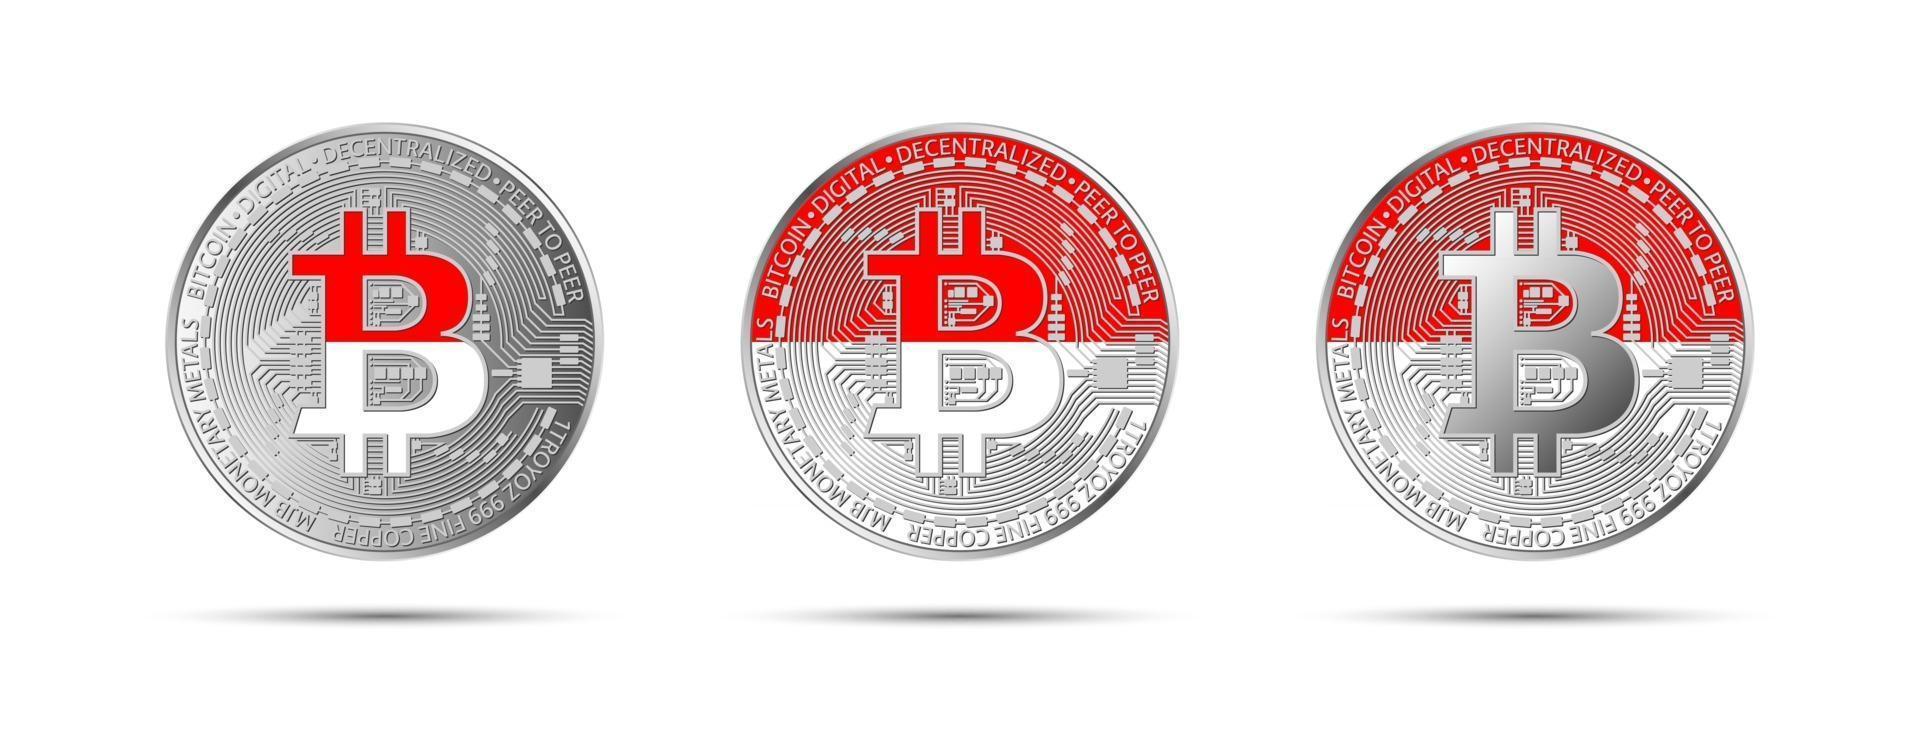 Three Bitcoin crypto coins with the flag of Indonesia Money of the future Modern cryptocurrency vector illustration